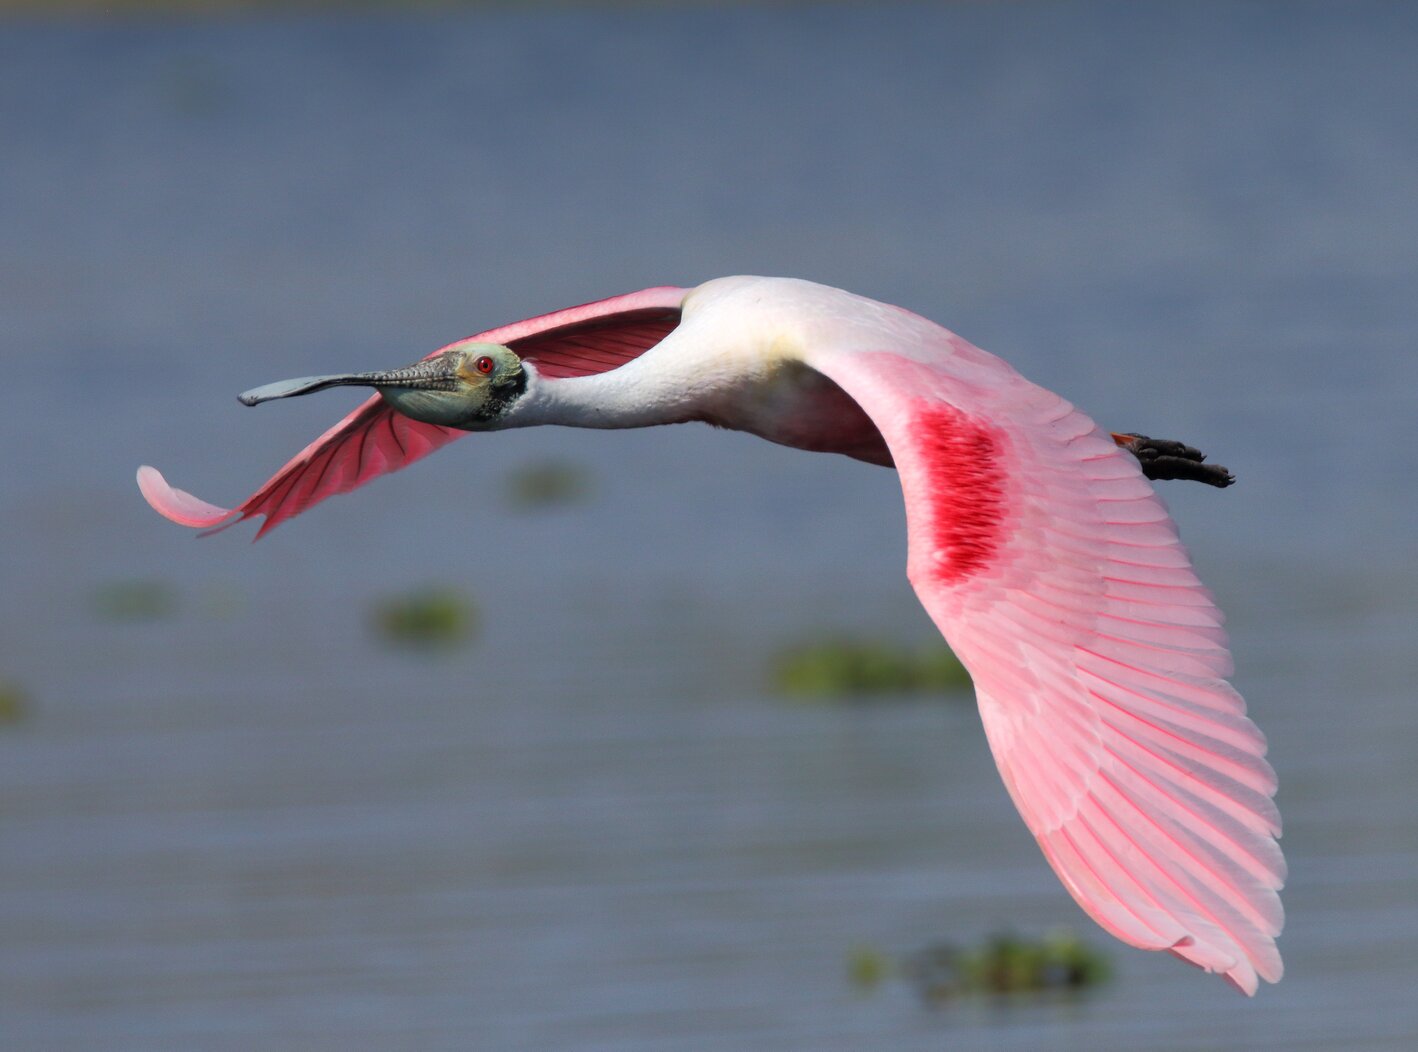 Birders were shocked to find a Roseate Spoonbill in Goethals Pond in 1992. Photo: Isaac Grant